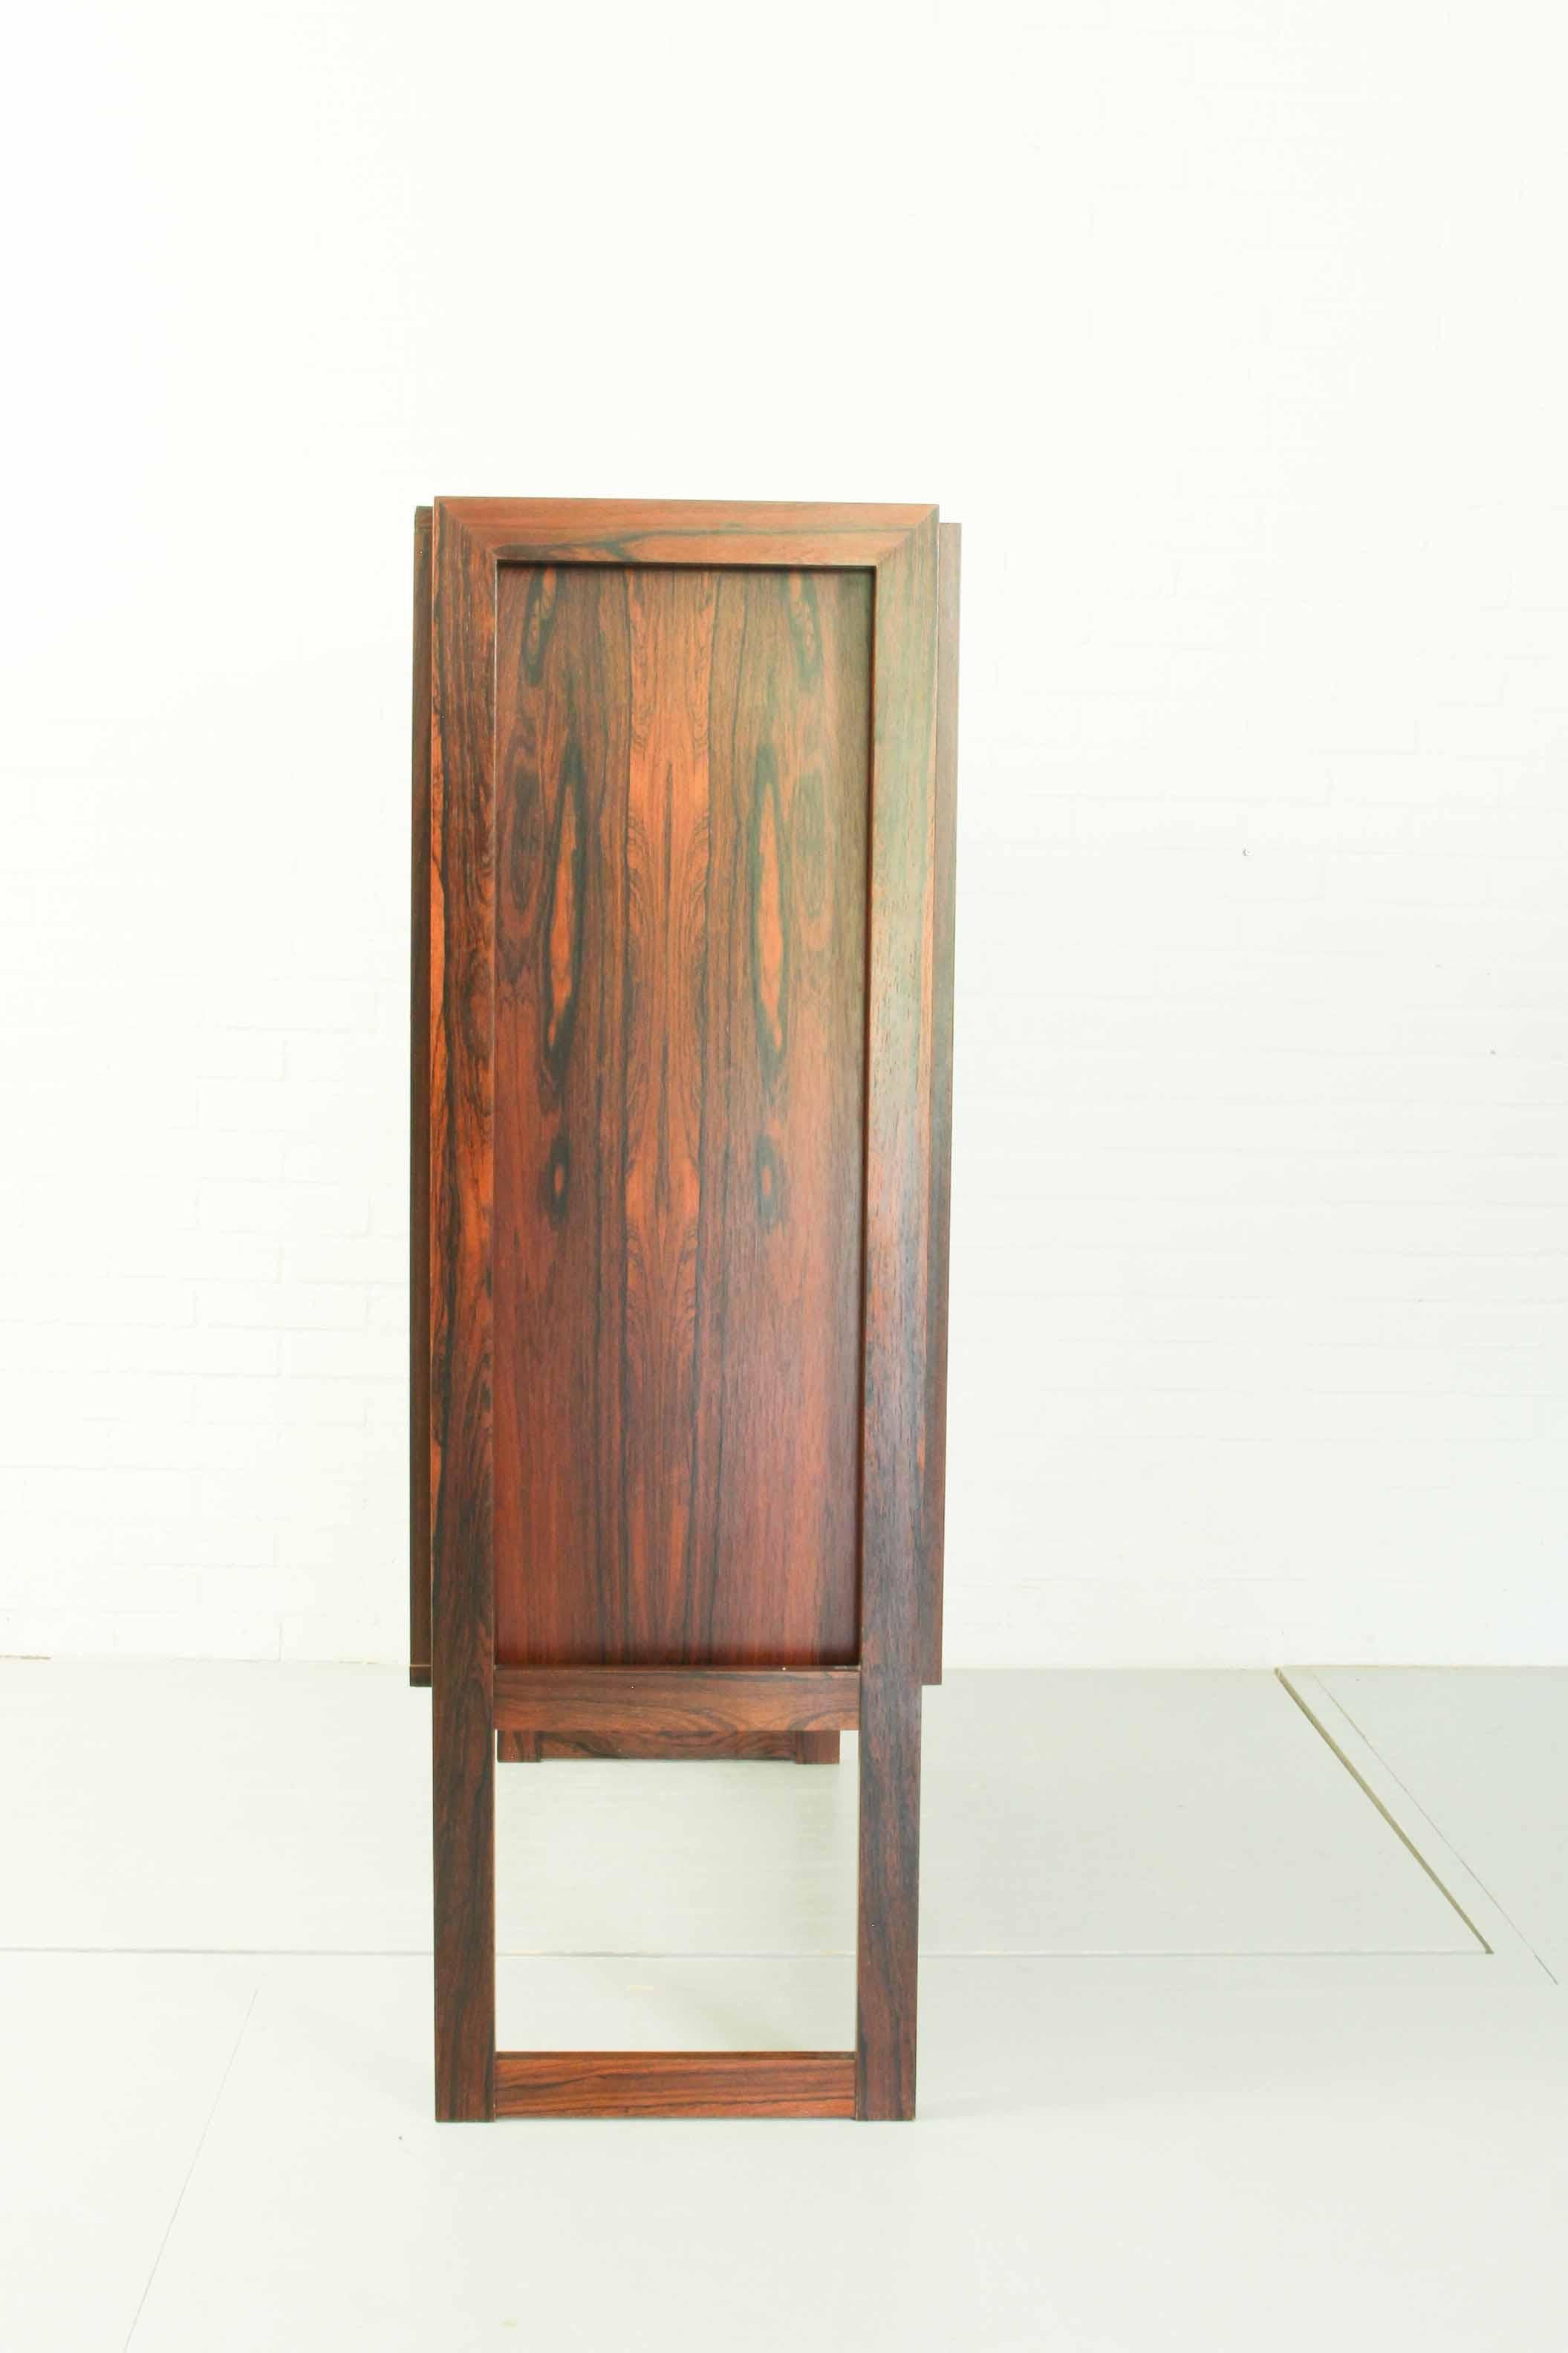 20th Century Highboard “Malmo” Within Wood Frame, Executed in Rio Palissander, 1960s